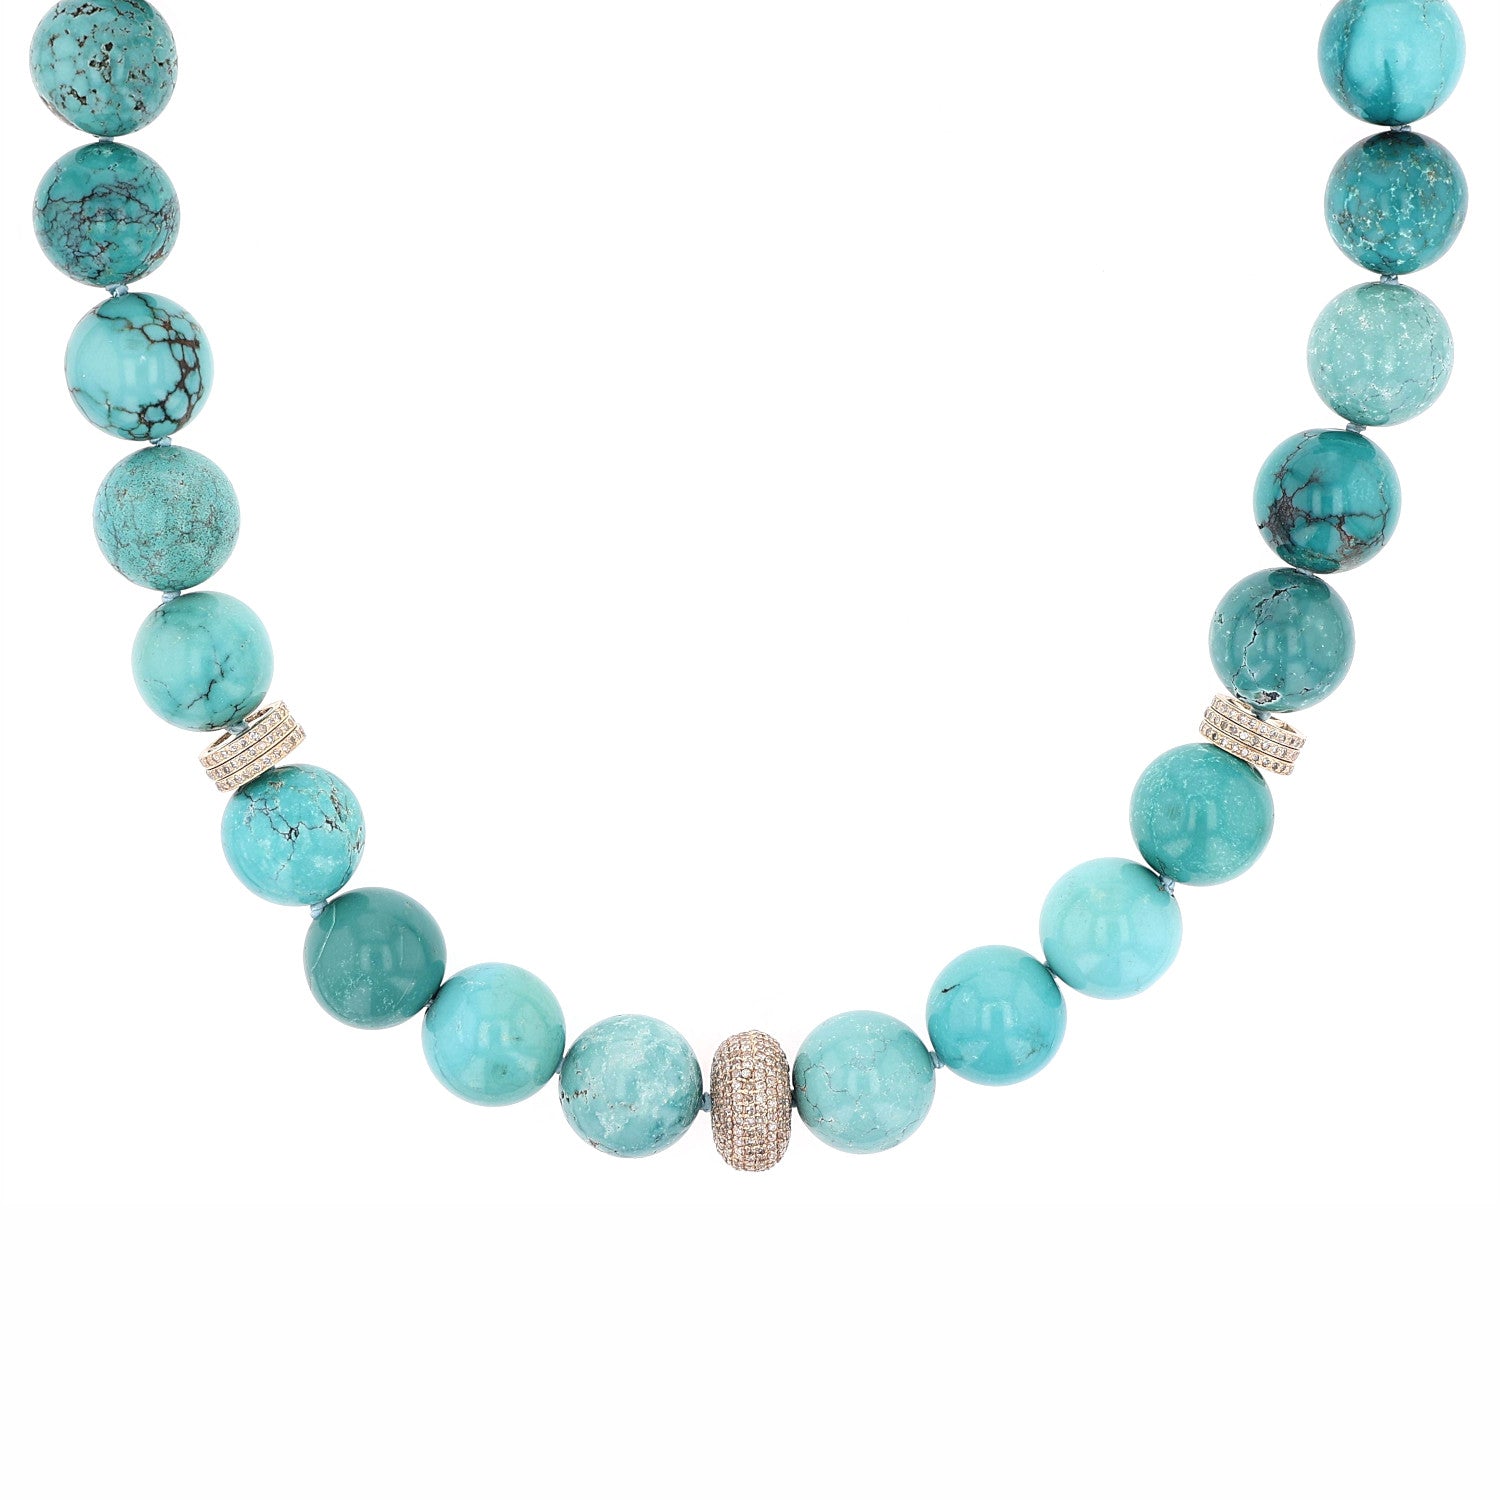 14K Gold Turquoise Diamond Bead Necklace  NG002635 - TBird